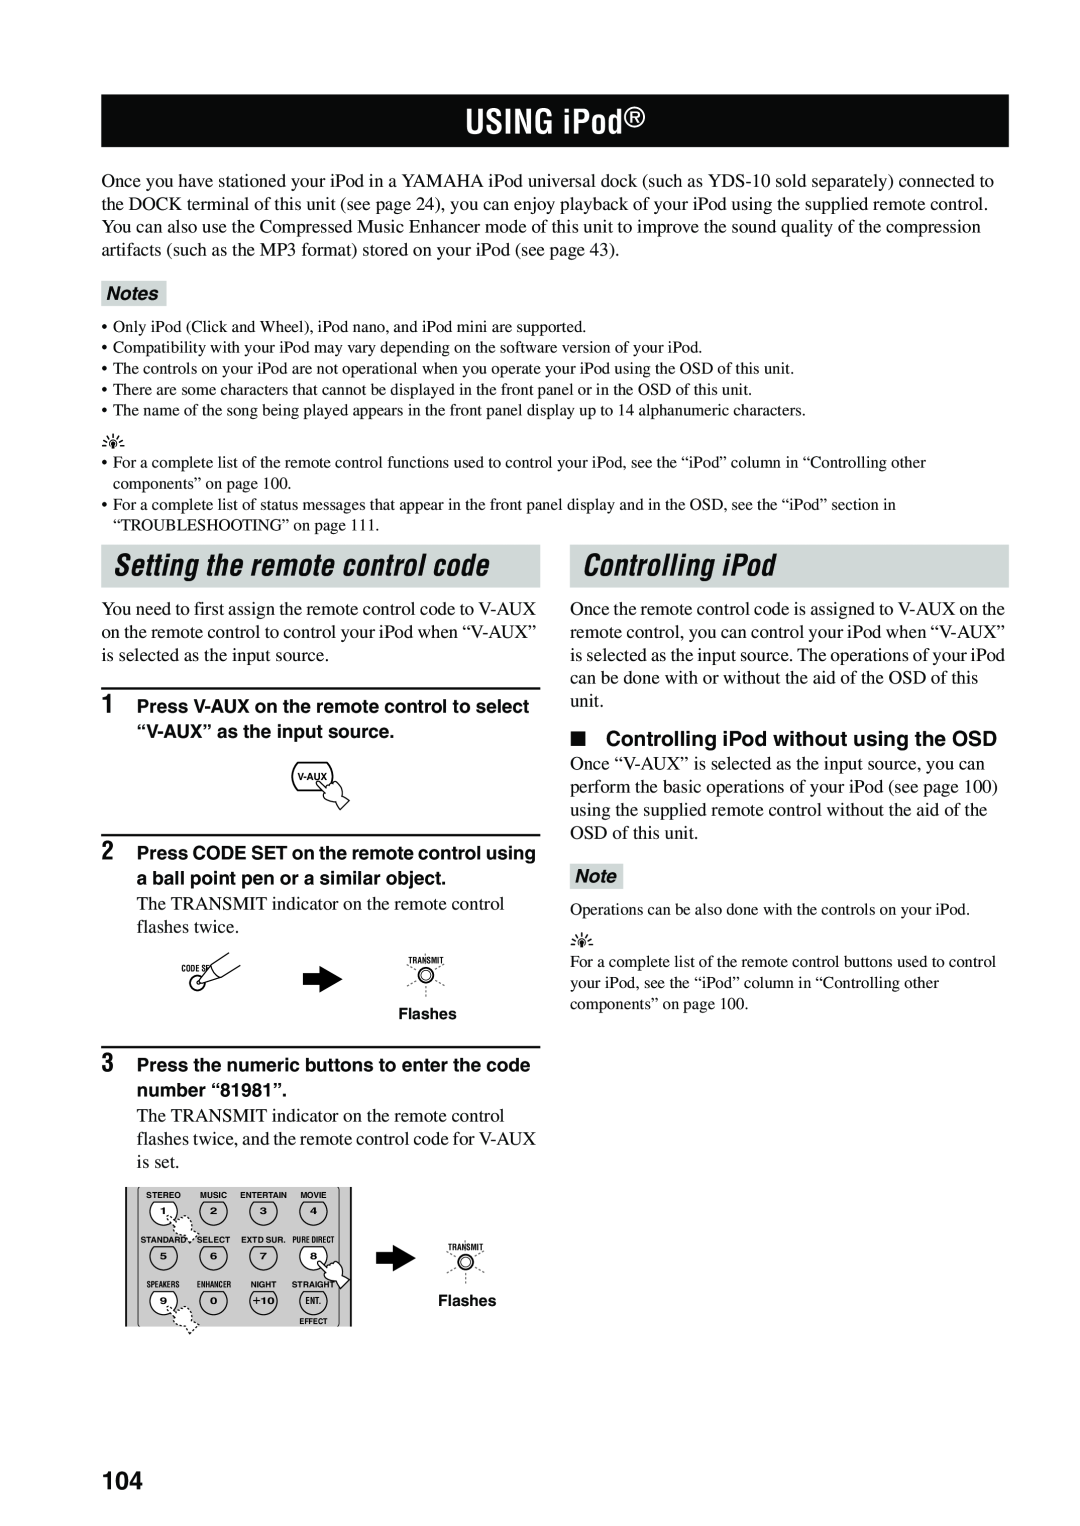 Yamaha HTR-5960 owner manual USING iPod, Controlling iPod without using the OSD, Setting the remote control code, Notes 